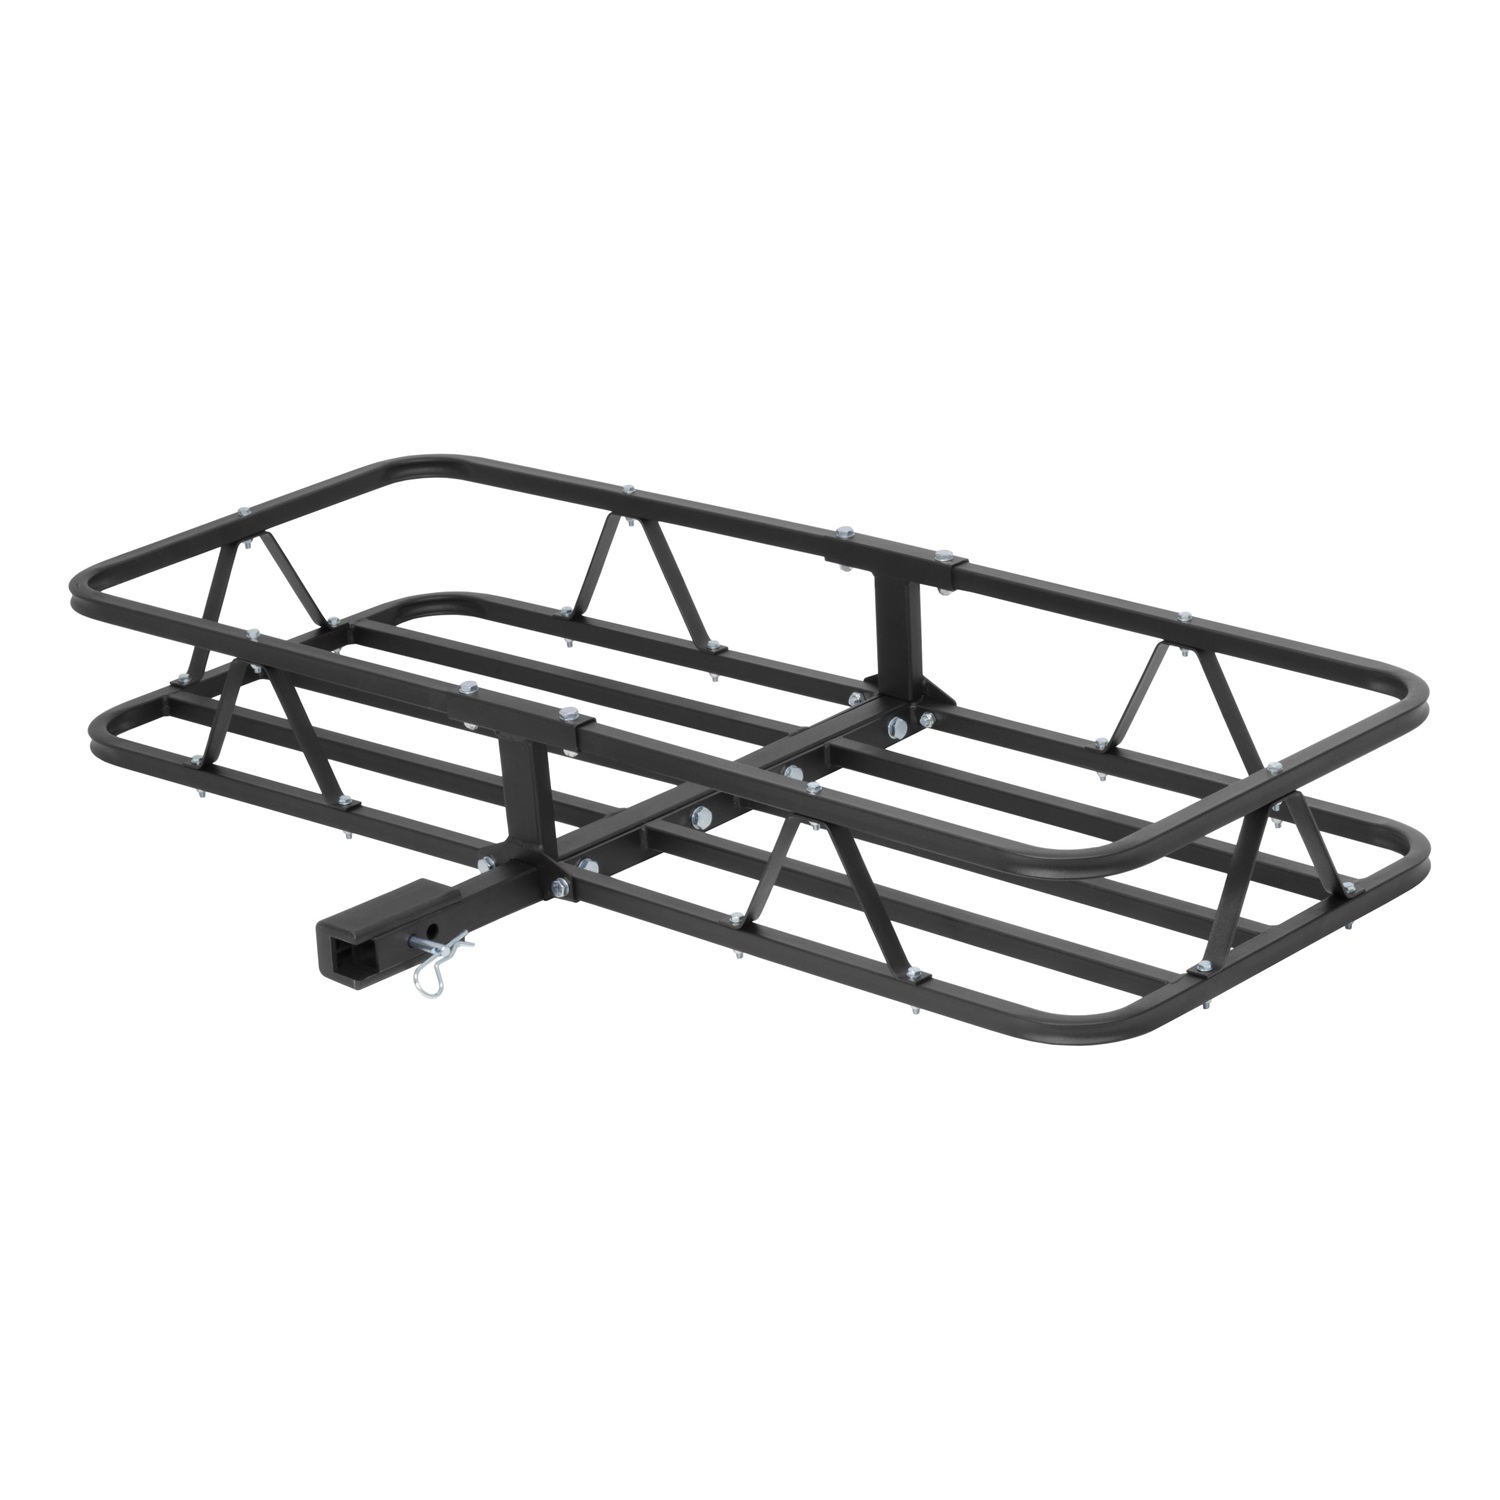 CURT Manufacturing CURT Manufacturing 18145 Basket Style Cargo Carrier  Fits